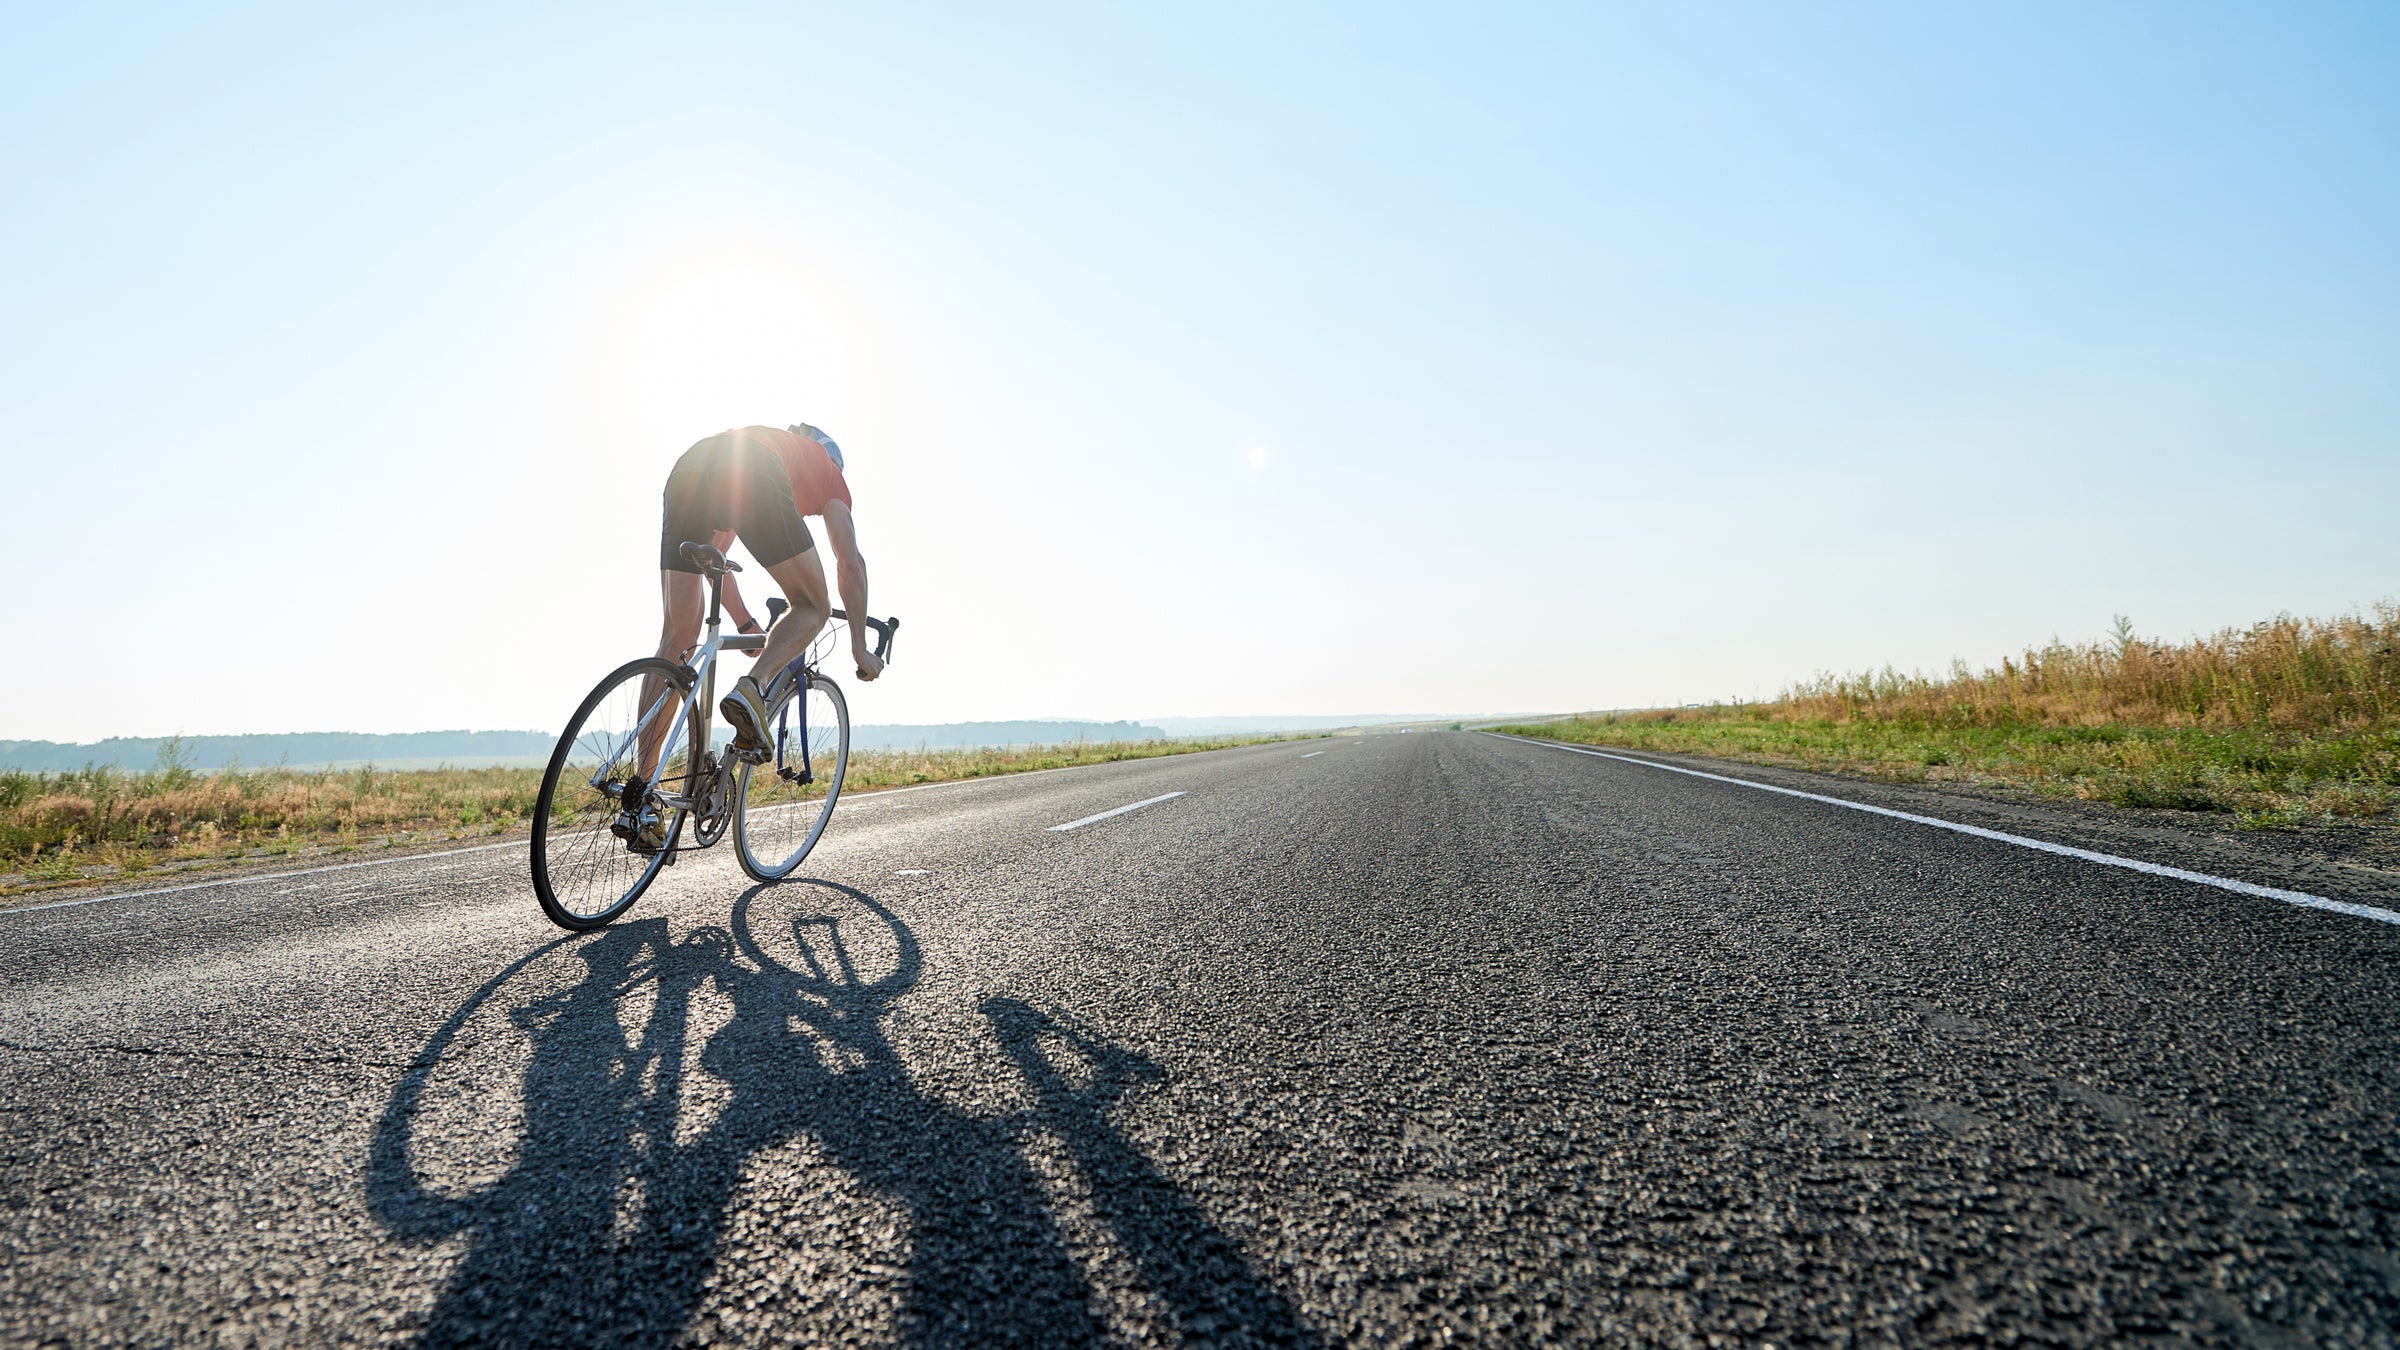 Cycling Workout for Speed  Interval Workouts for Cyclists